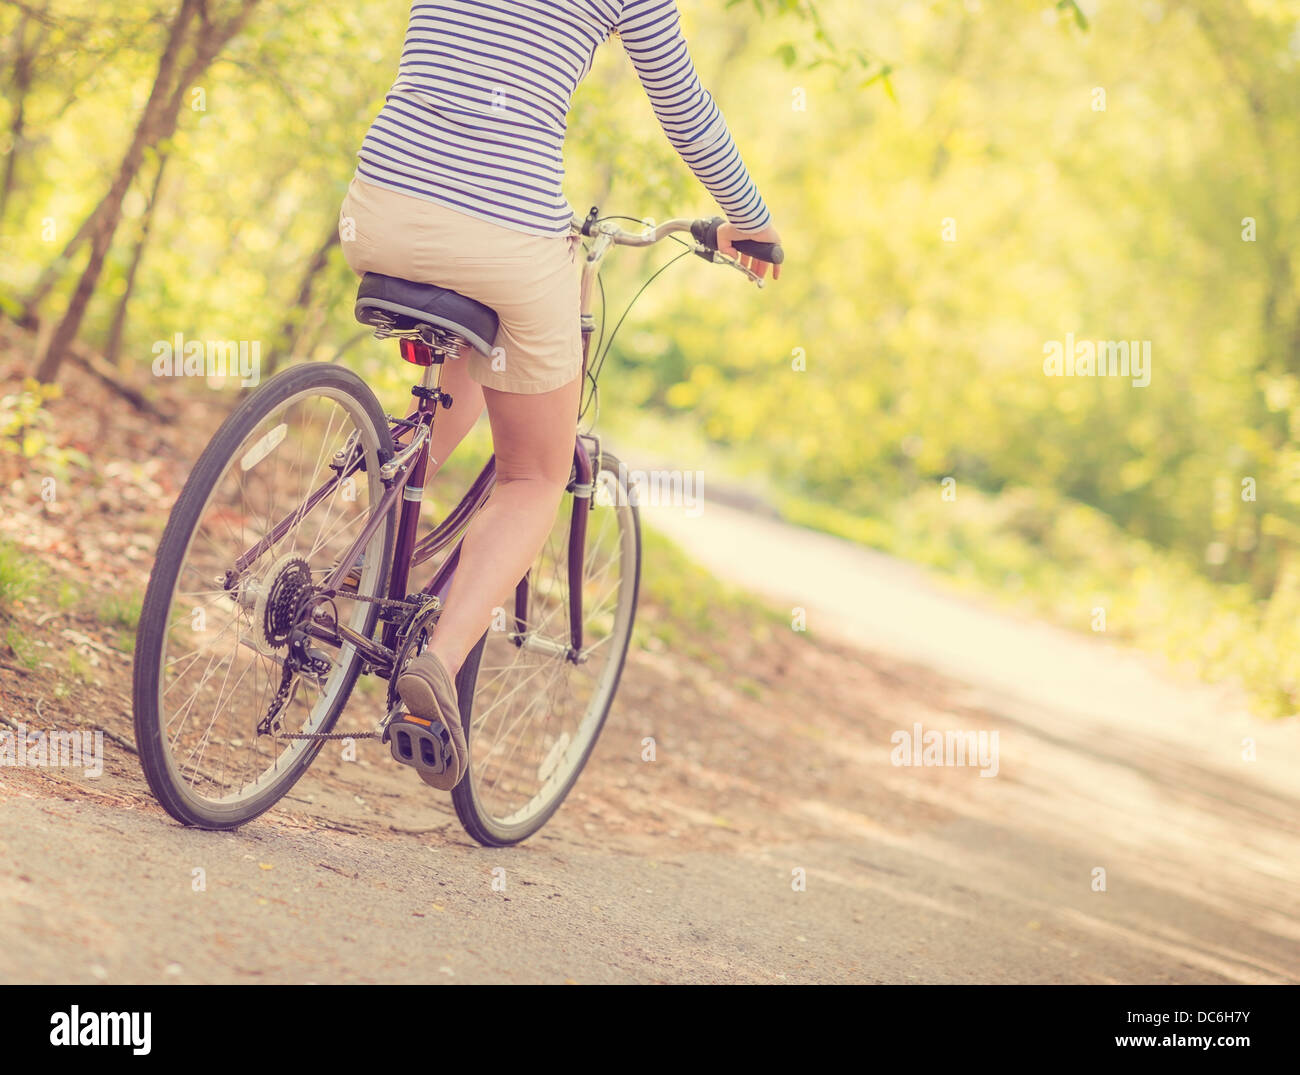 USA, New York State, New York, Central Park, Mid adult woman riding bicycle, low section Banque D'Images